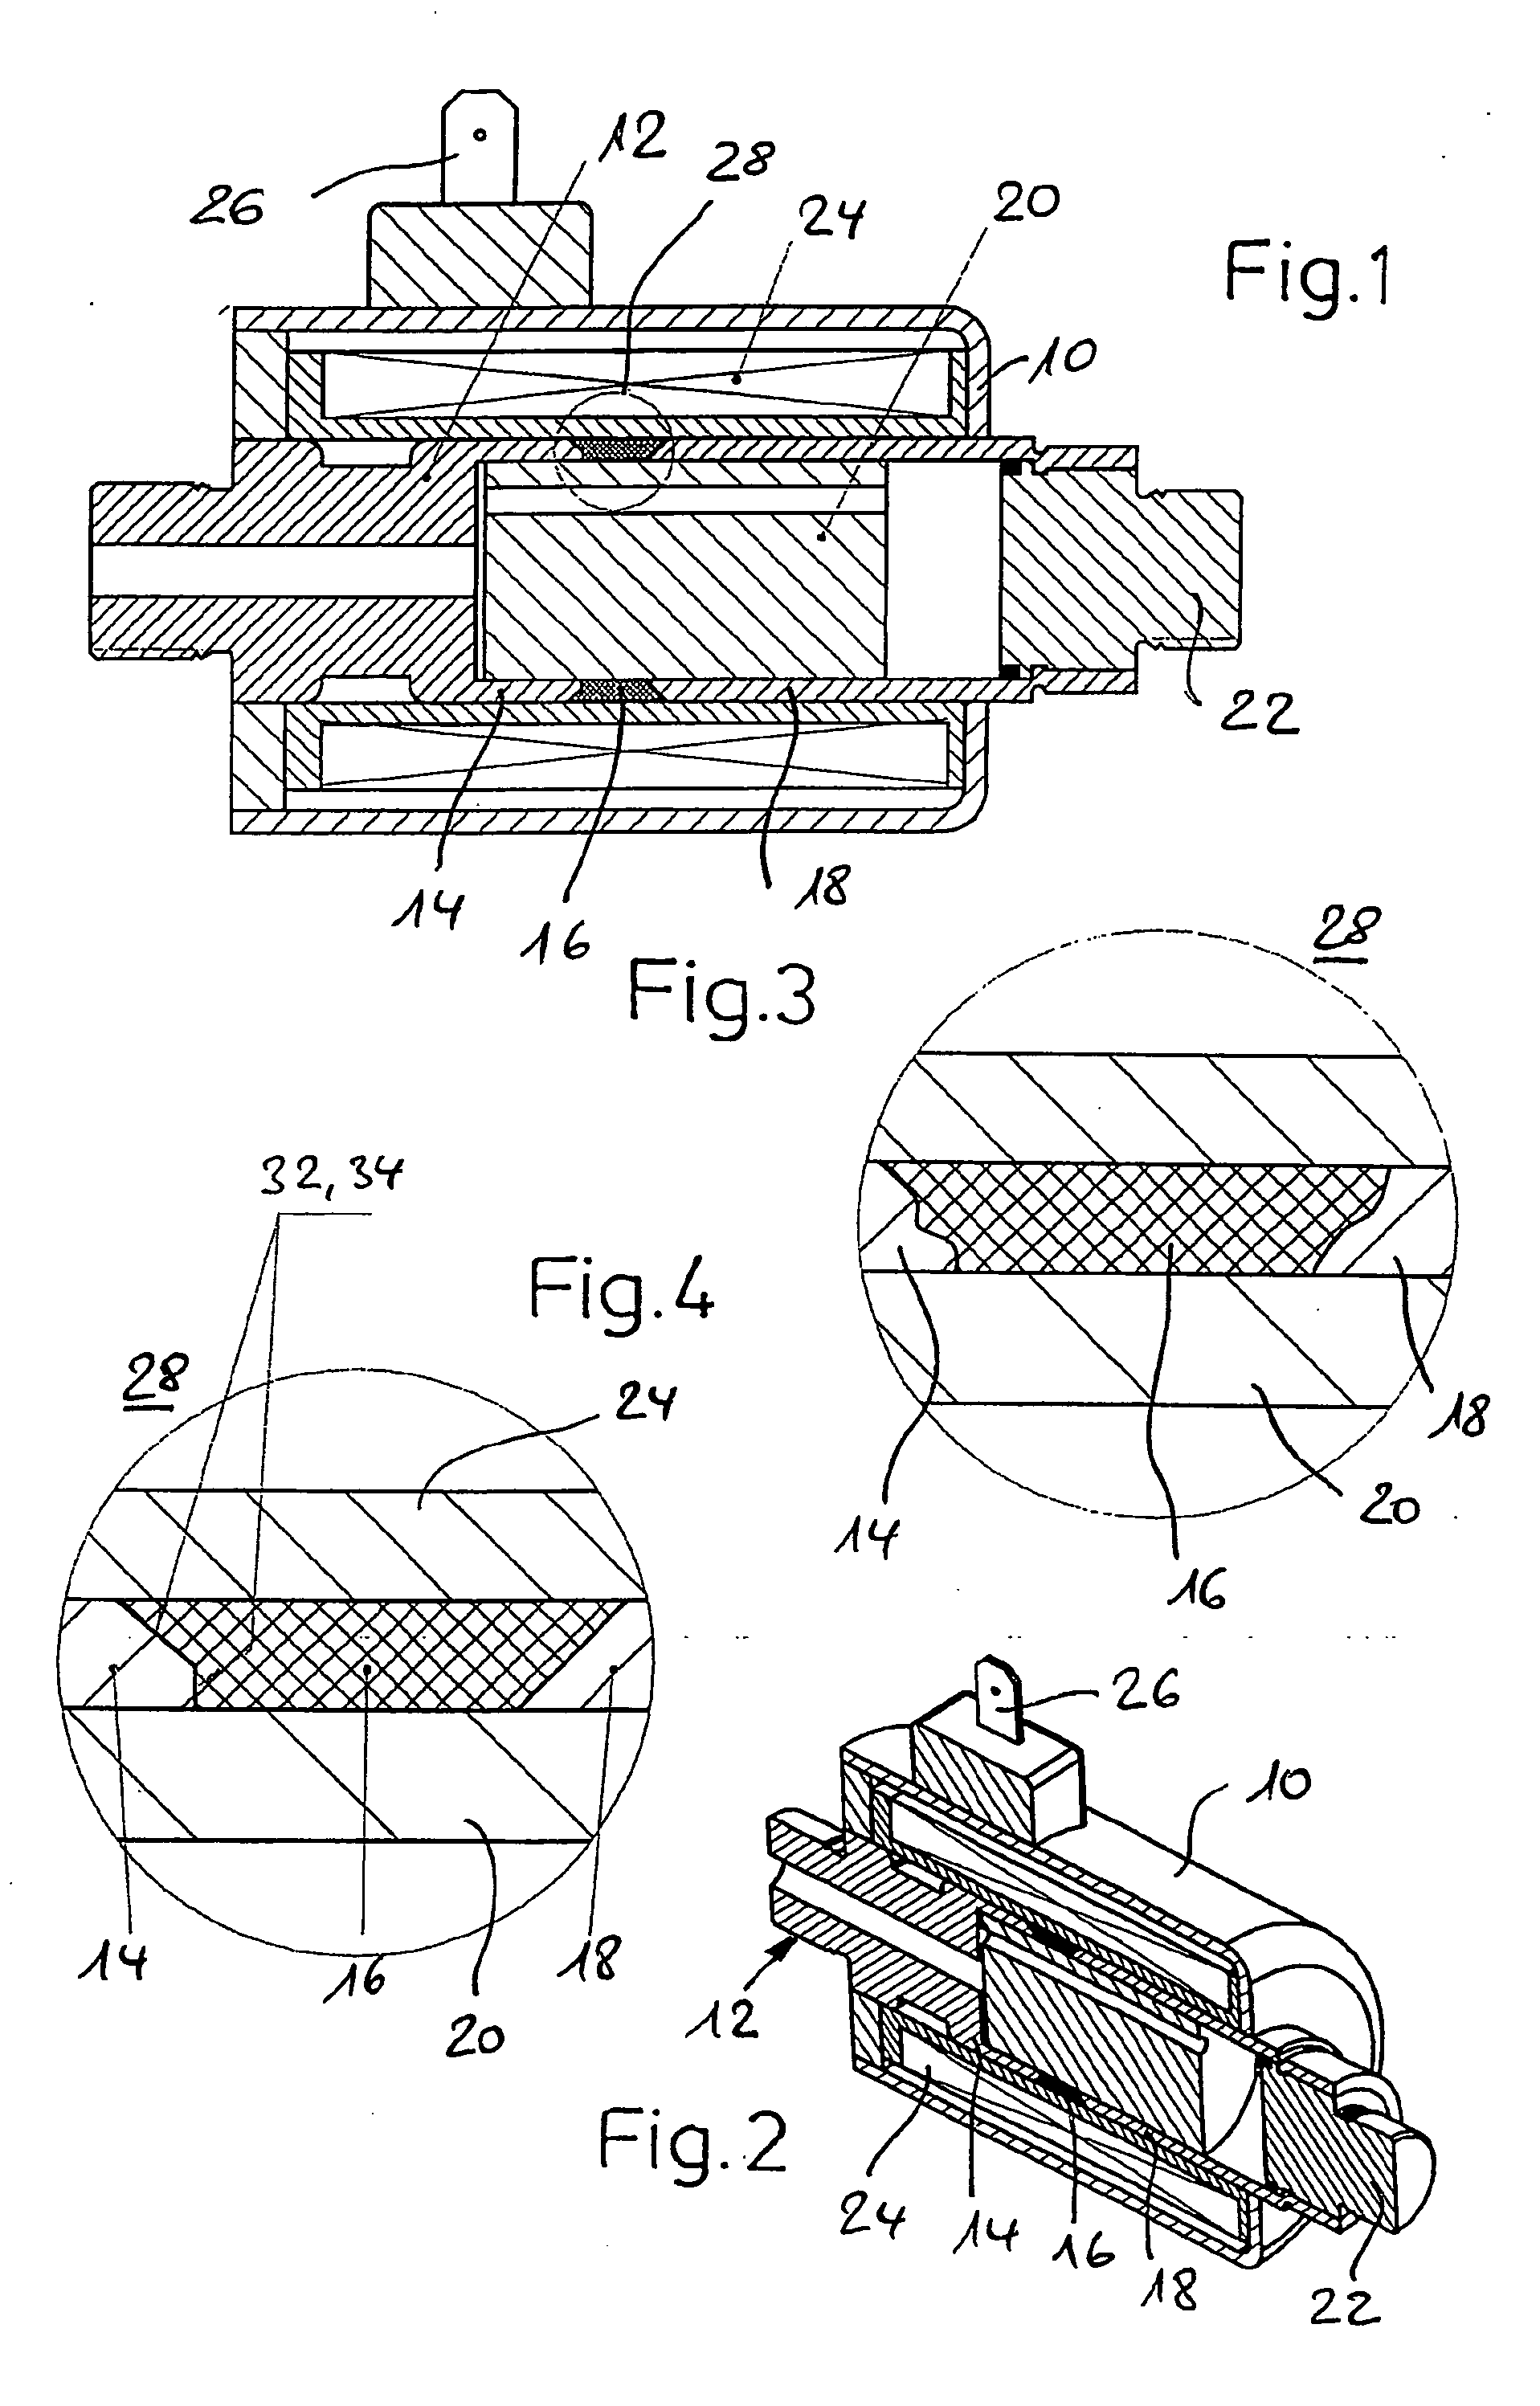 Electromagnetic actuating device